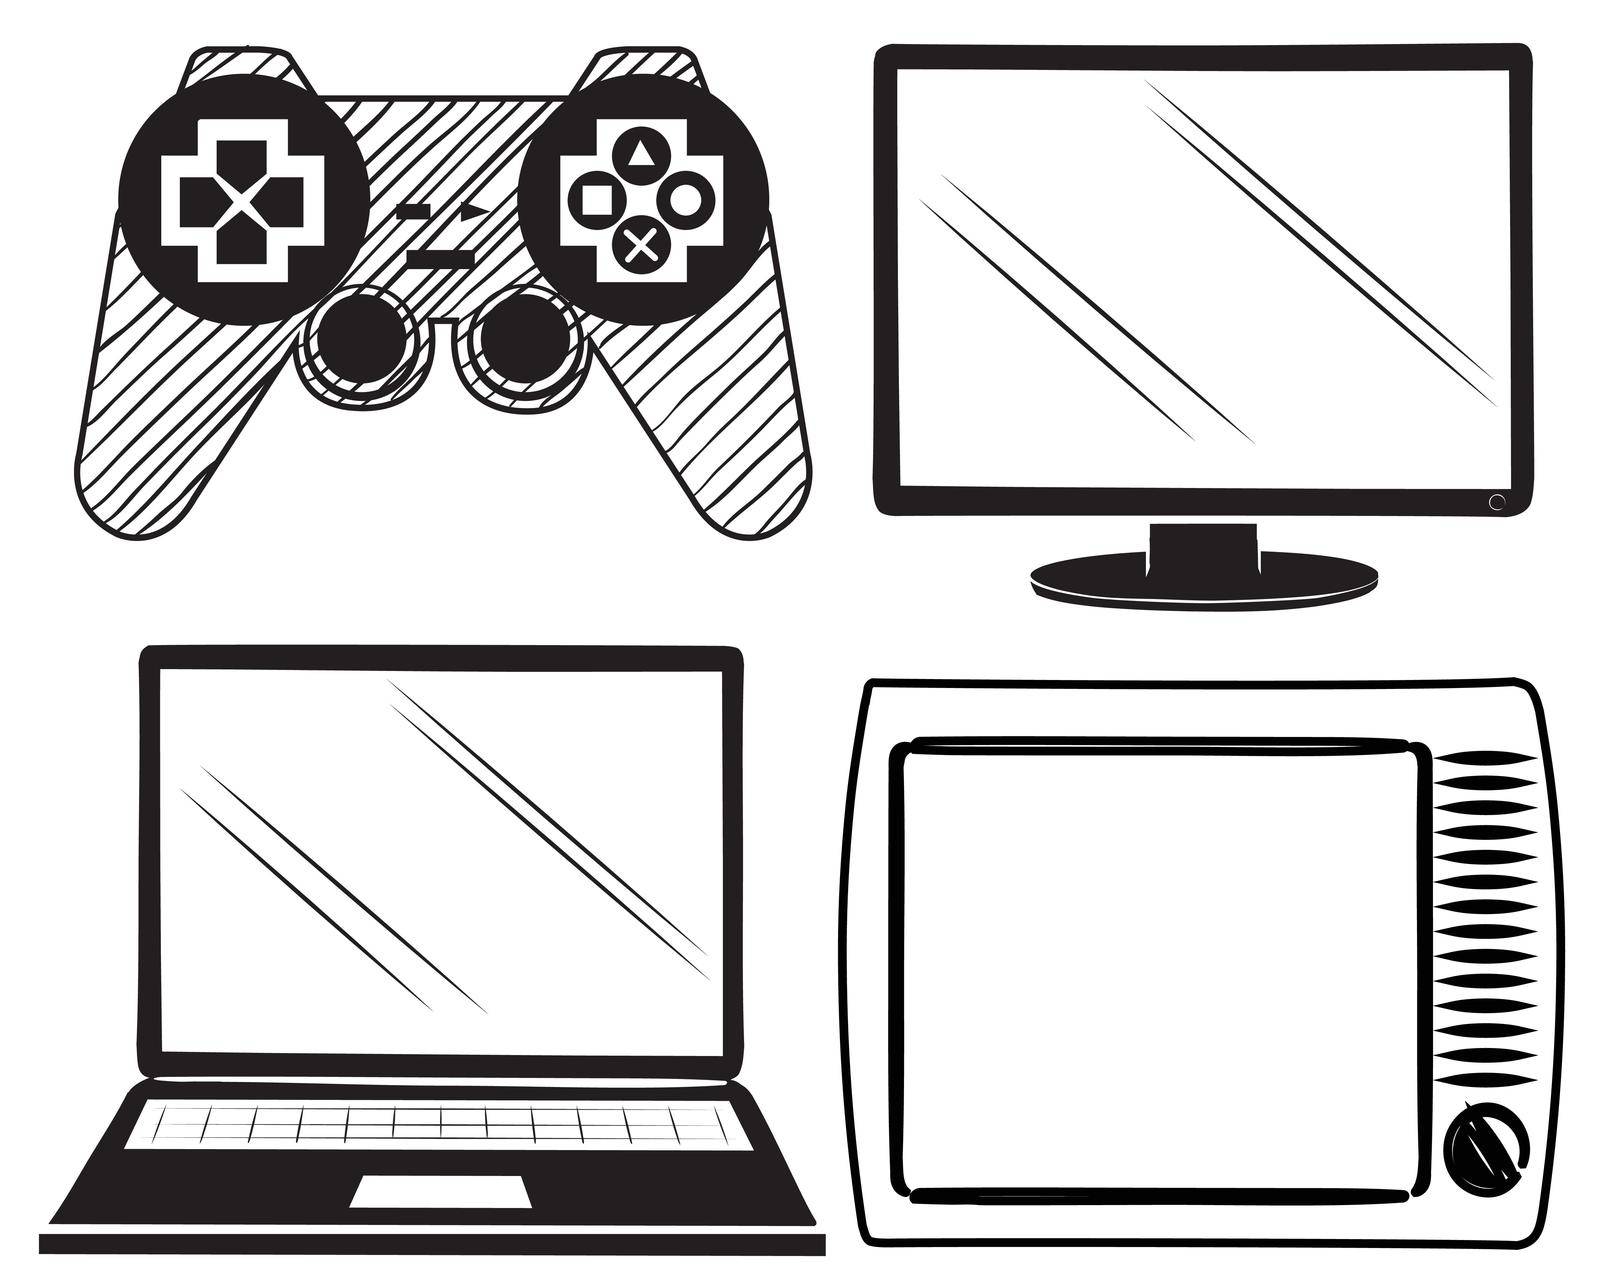 Illustration of the electronic devices on a white background